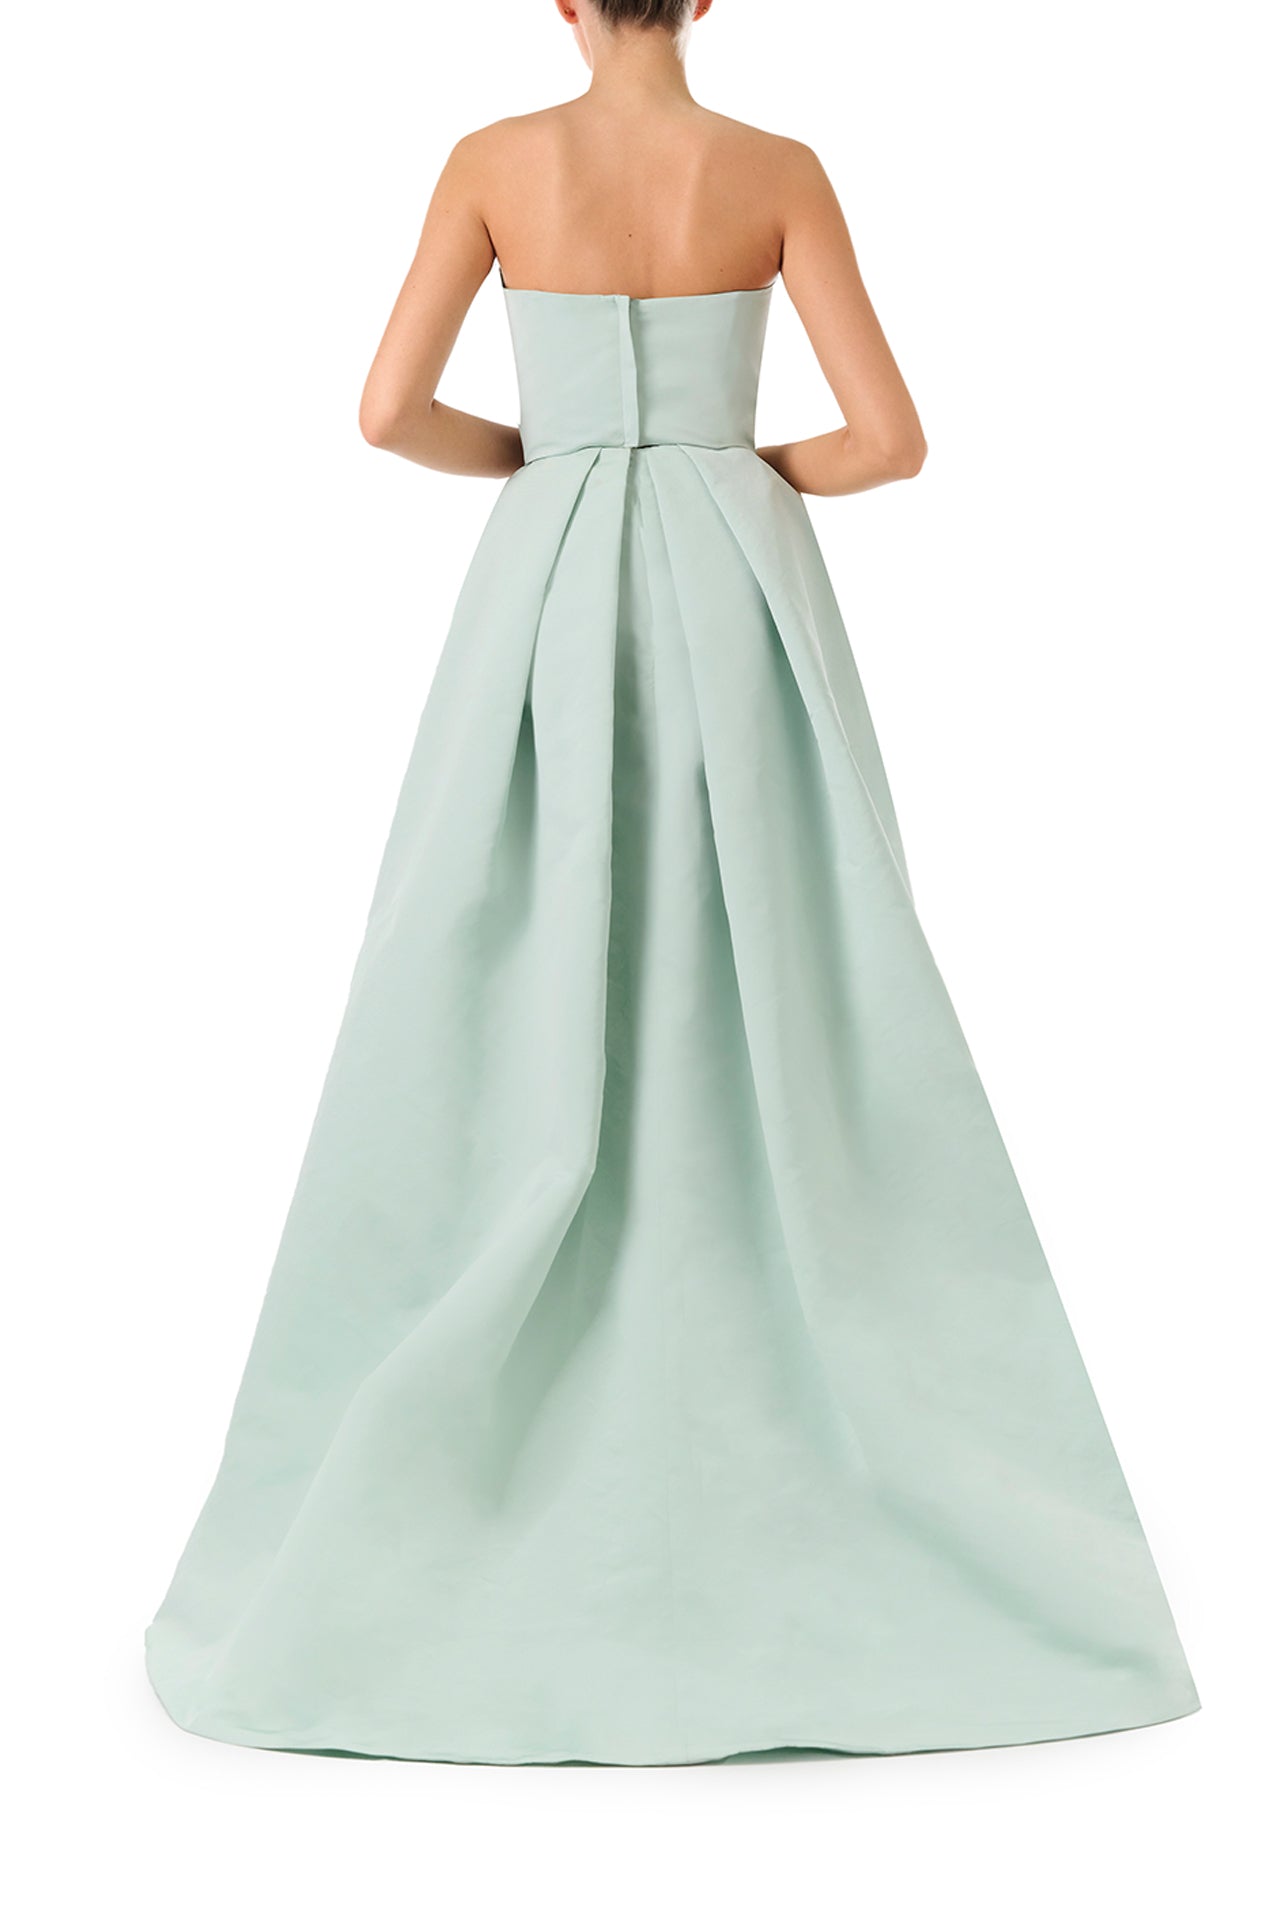 Monique Lhuillier Spring 2023 ball skirt with front slit in pistachio silk faille fabric - back.